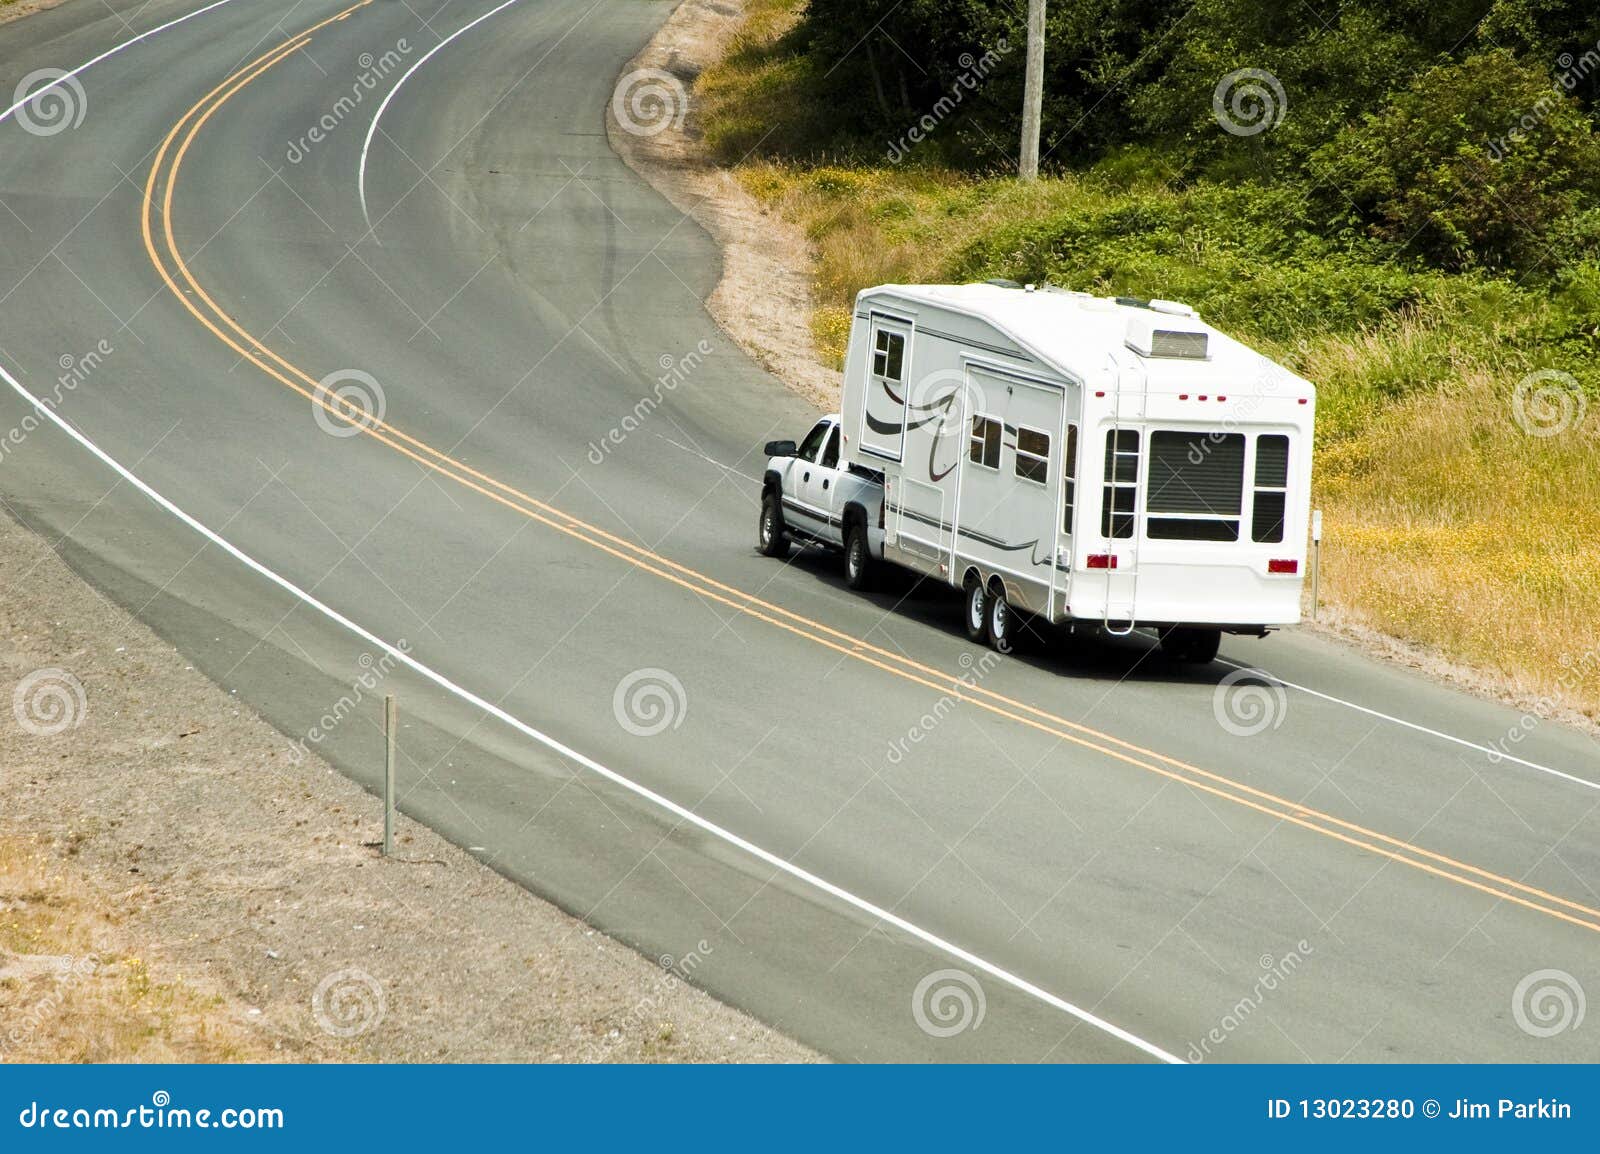 recreational vehicles on the highway